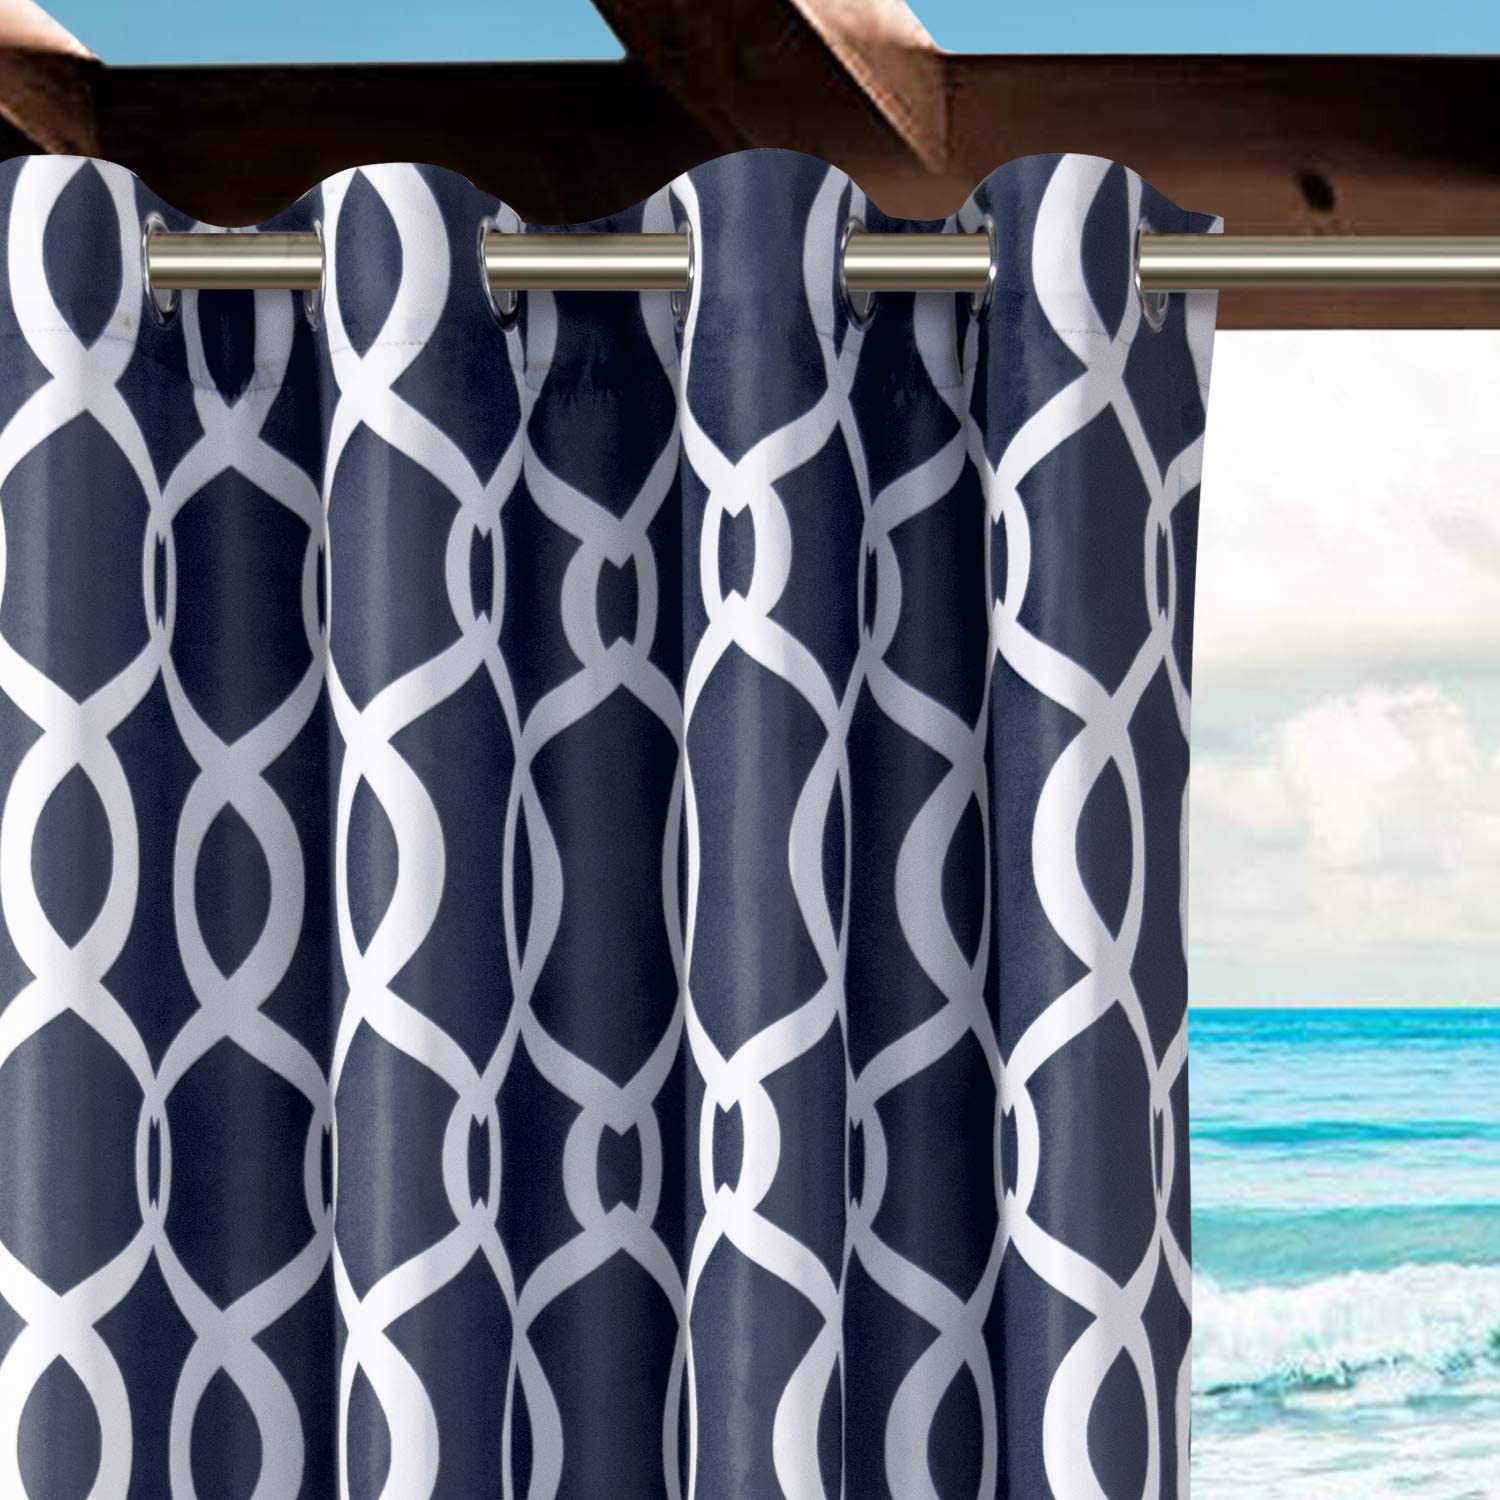 Moroccan Print Outdoor Curtains for Patio, Pergola, Porch, Deck, Lanai Waterproof Grommet Top 1 Panel KGORGE Store